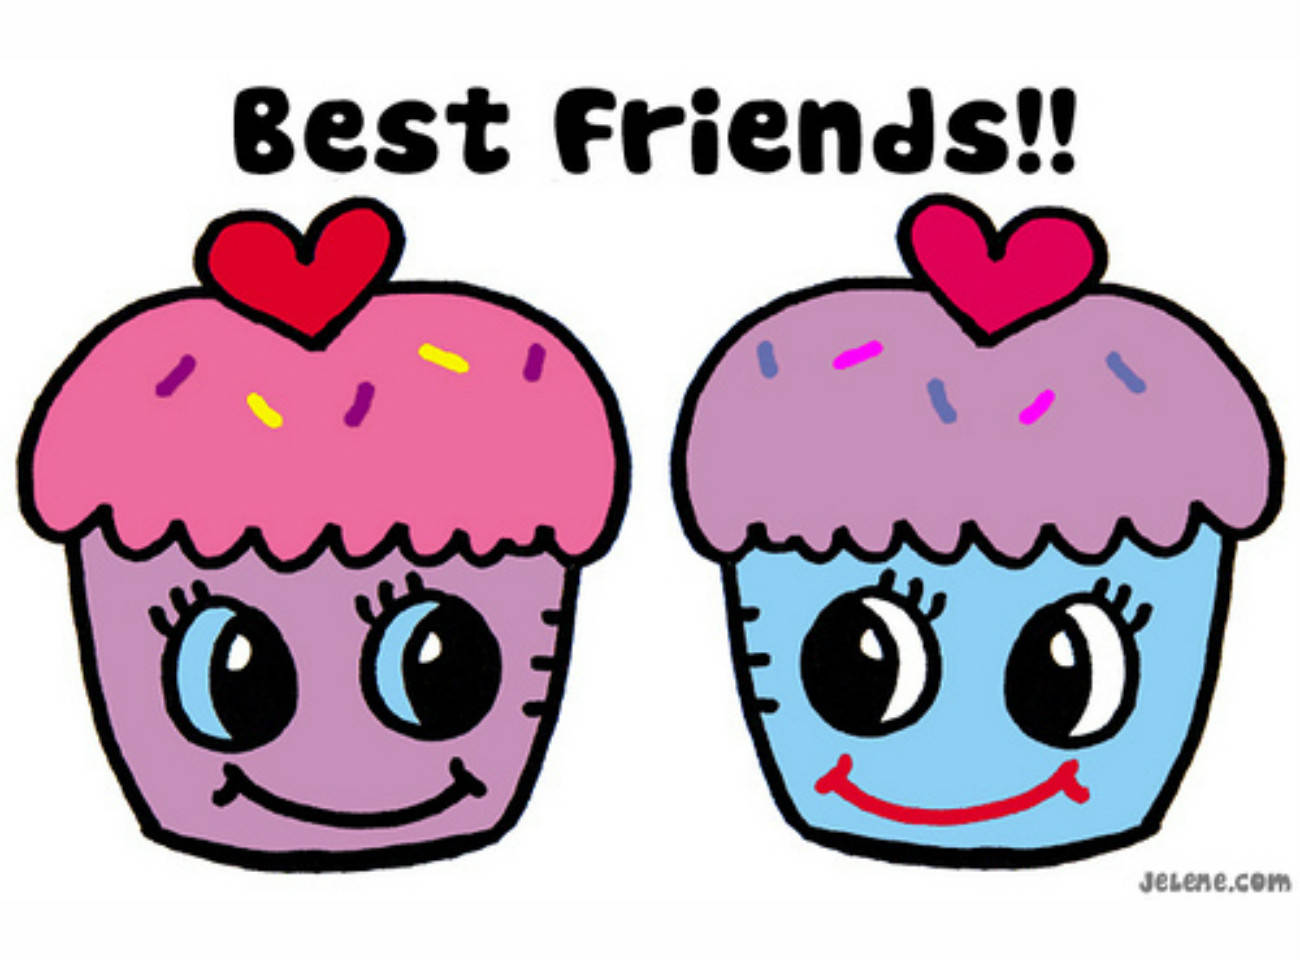 Best friends share everything, even cupcakes! Wallpaper